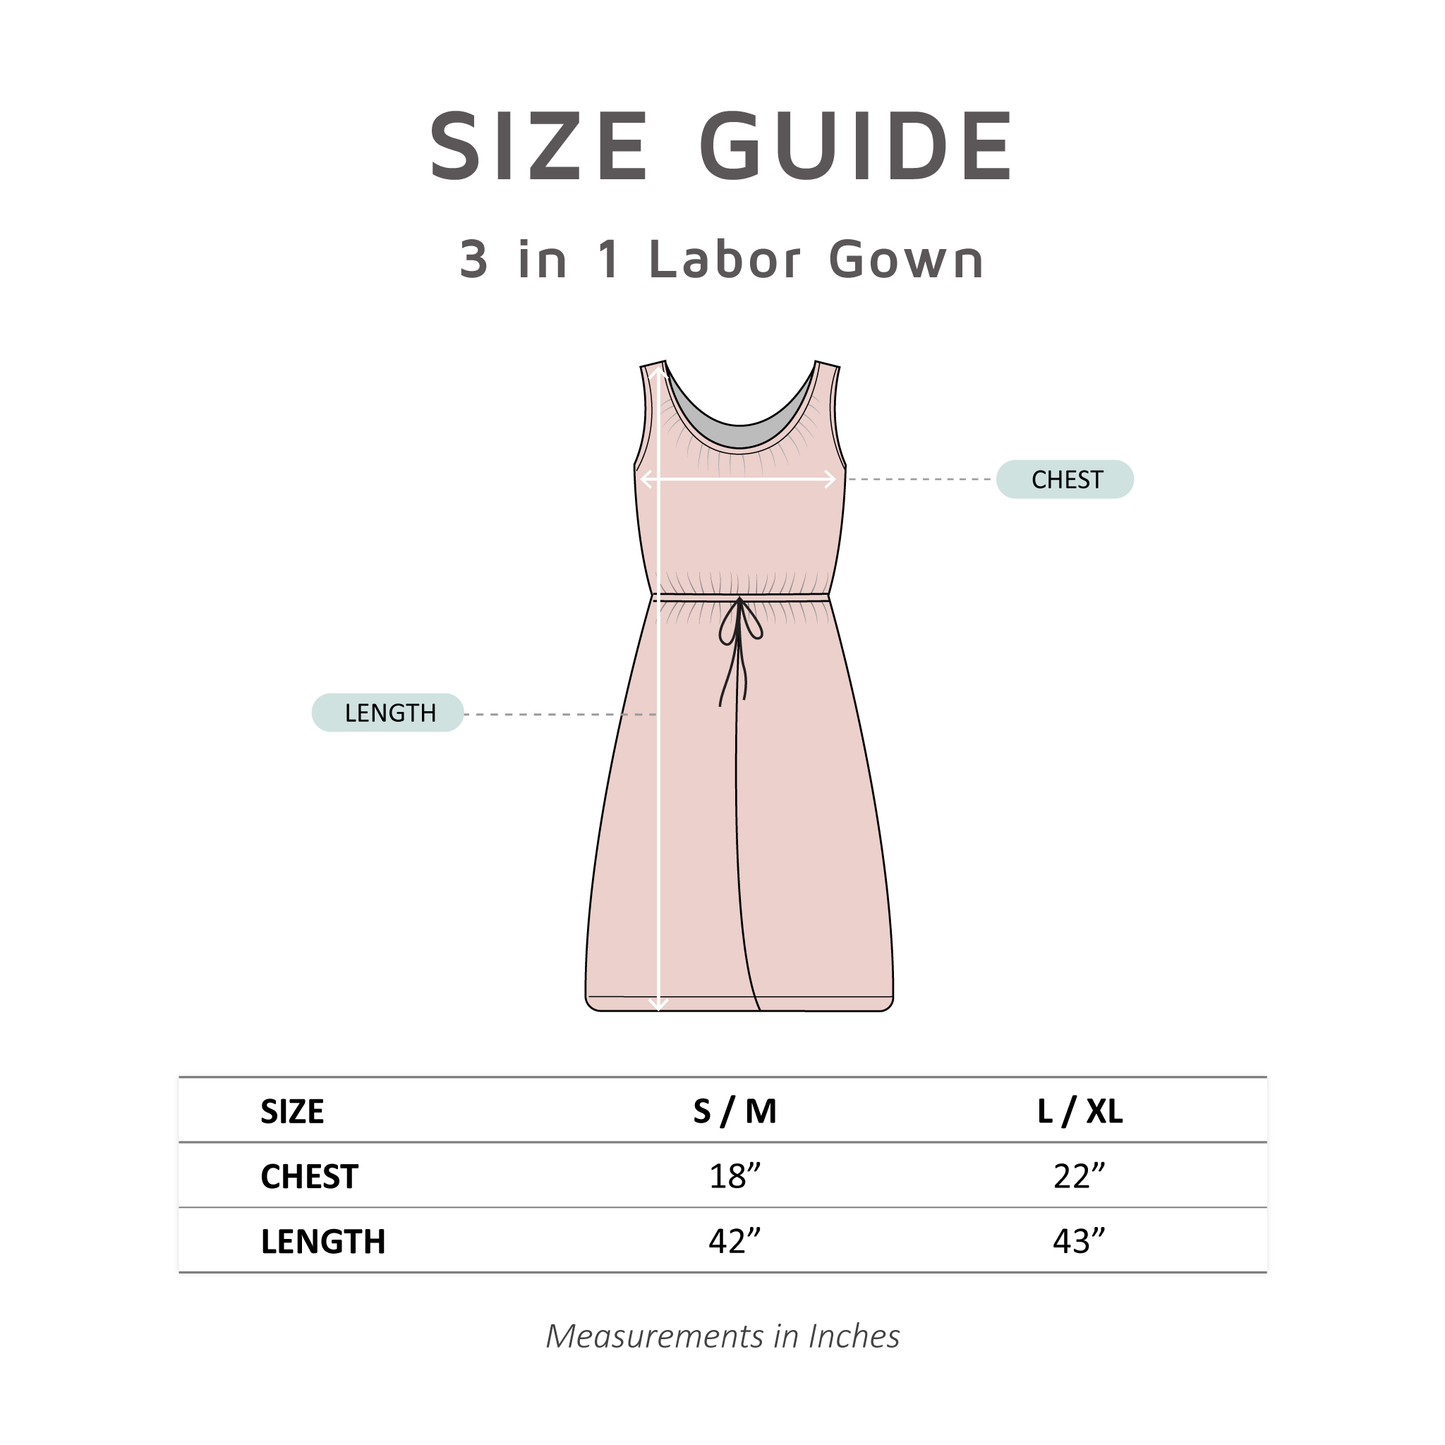 Light Grey 3 in 1 Labor Gown